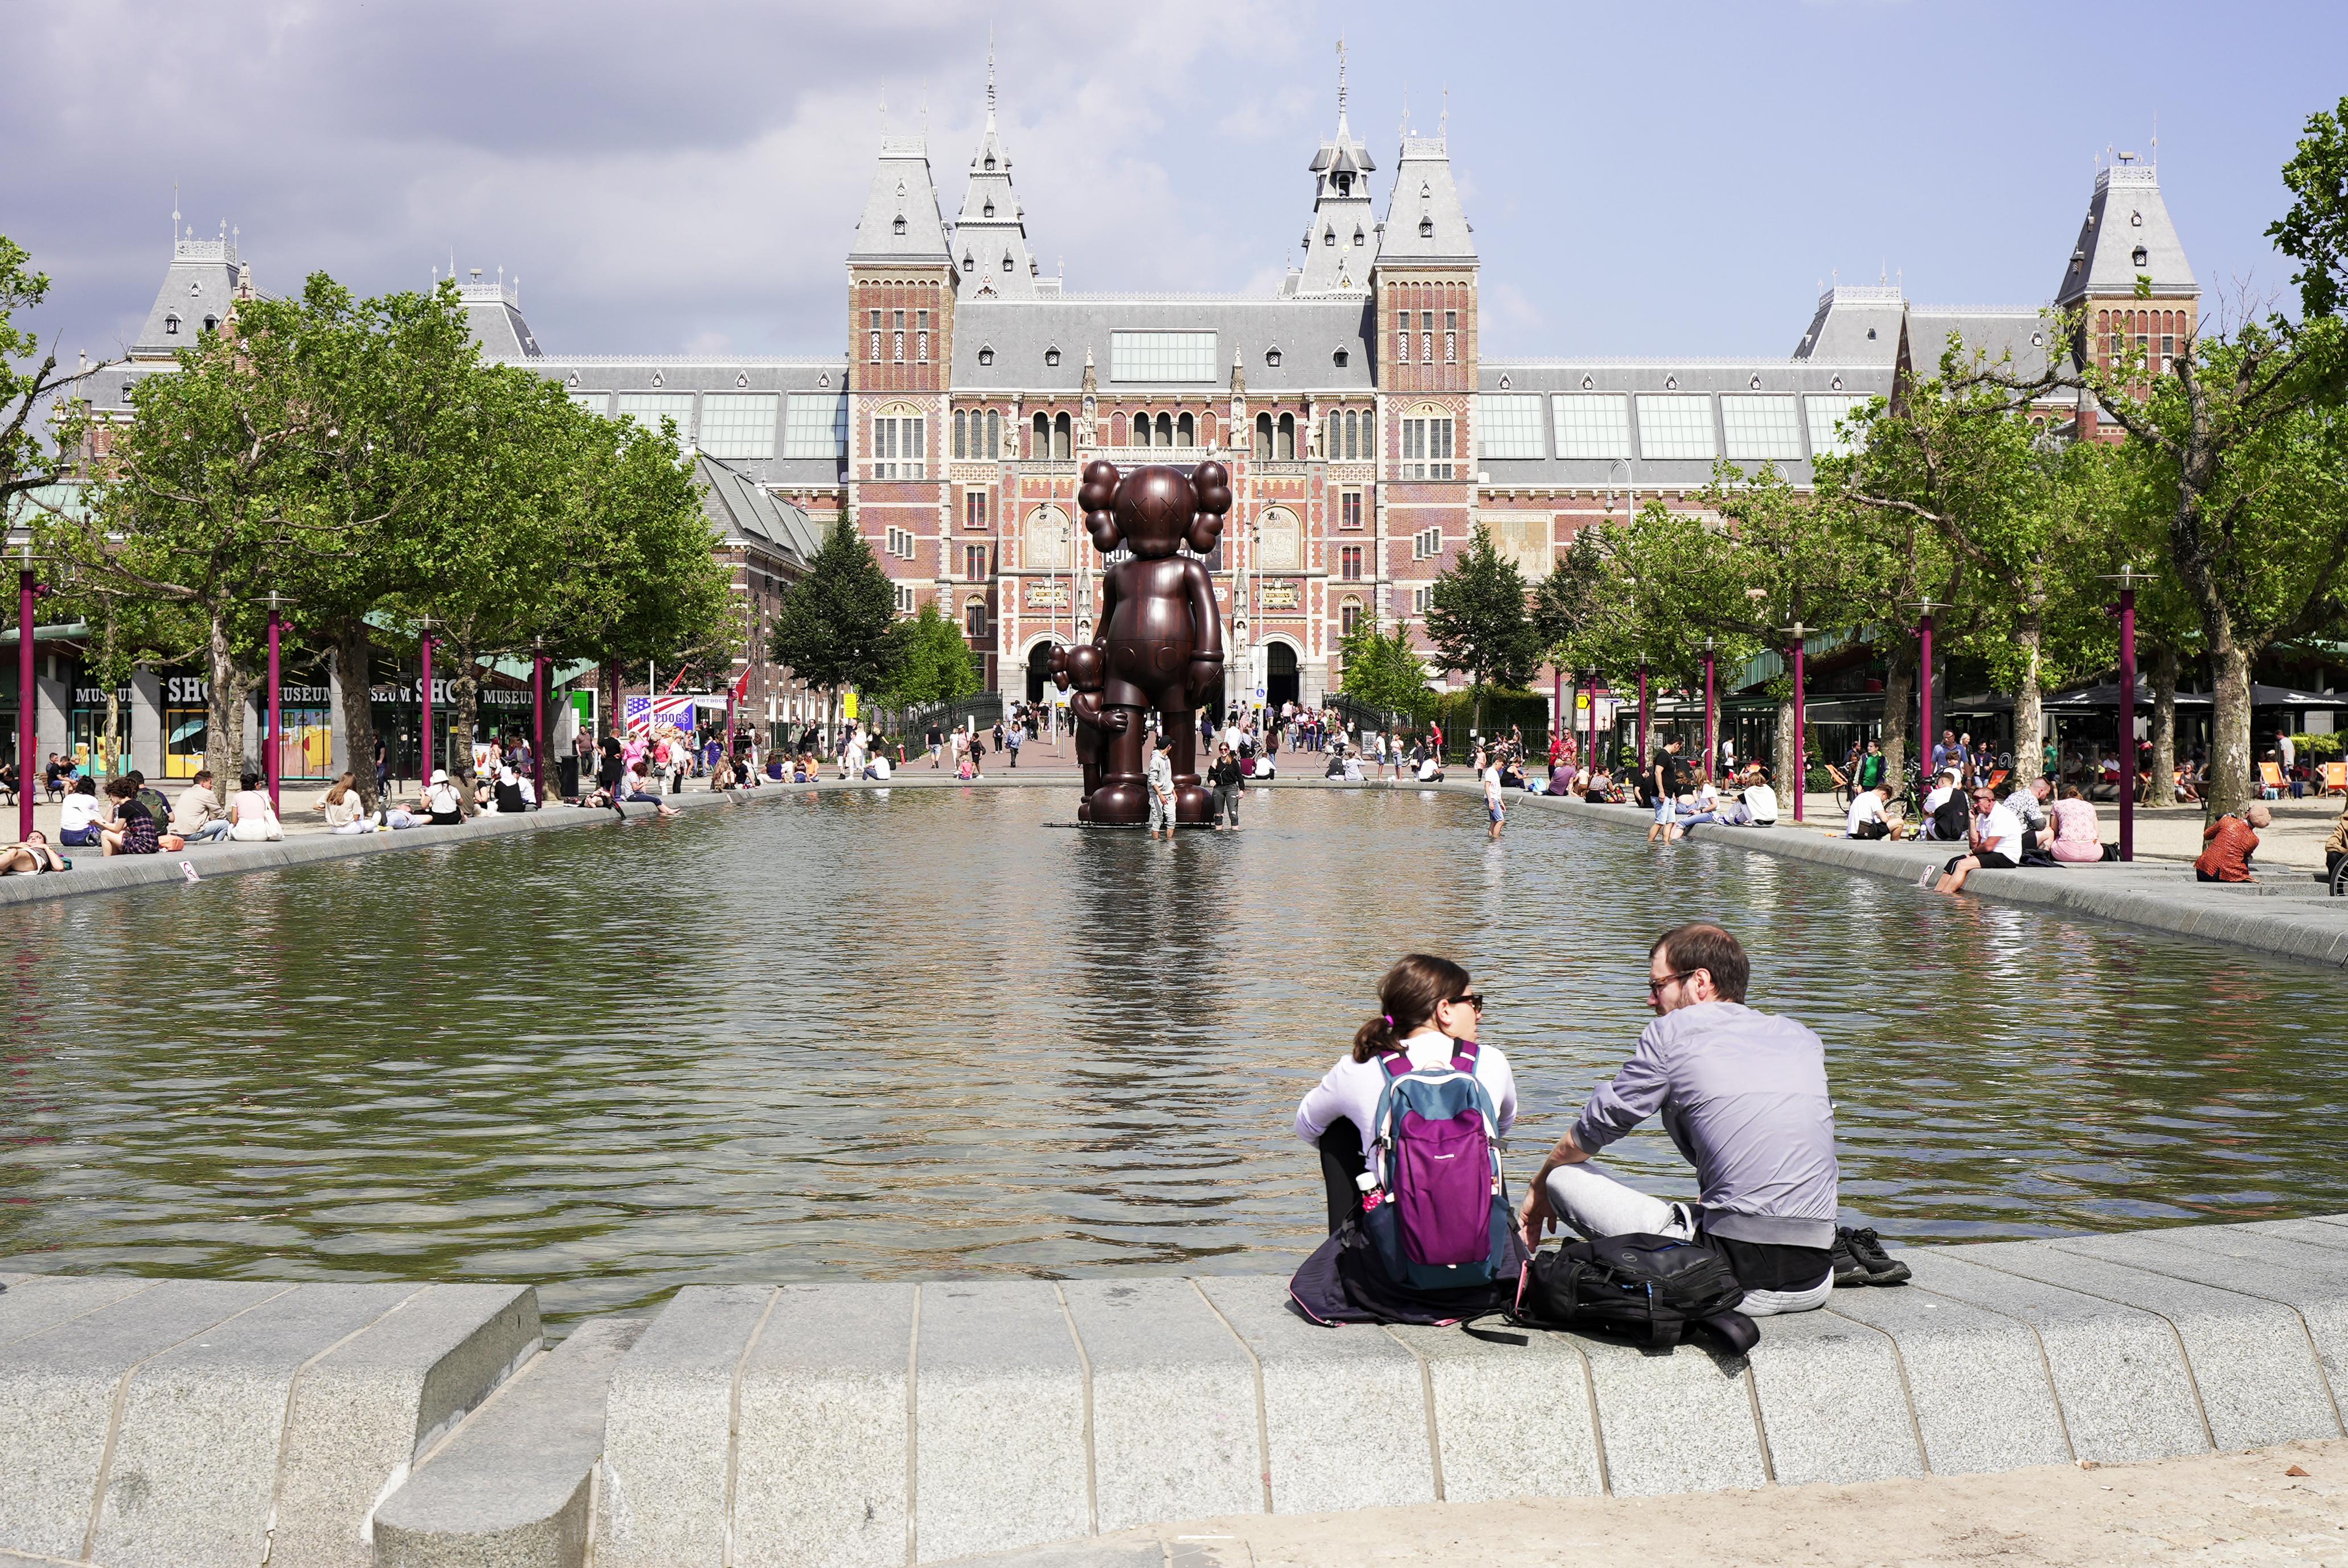 People sitting on the edge of water outside the Rijksmuseum in Amsterdam.